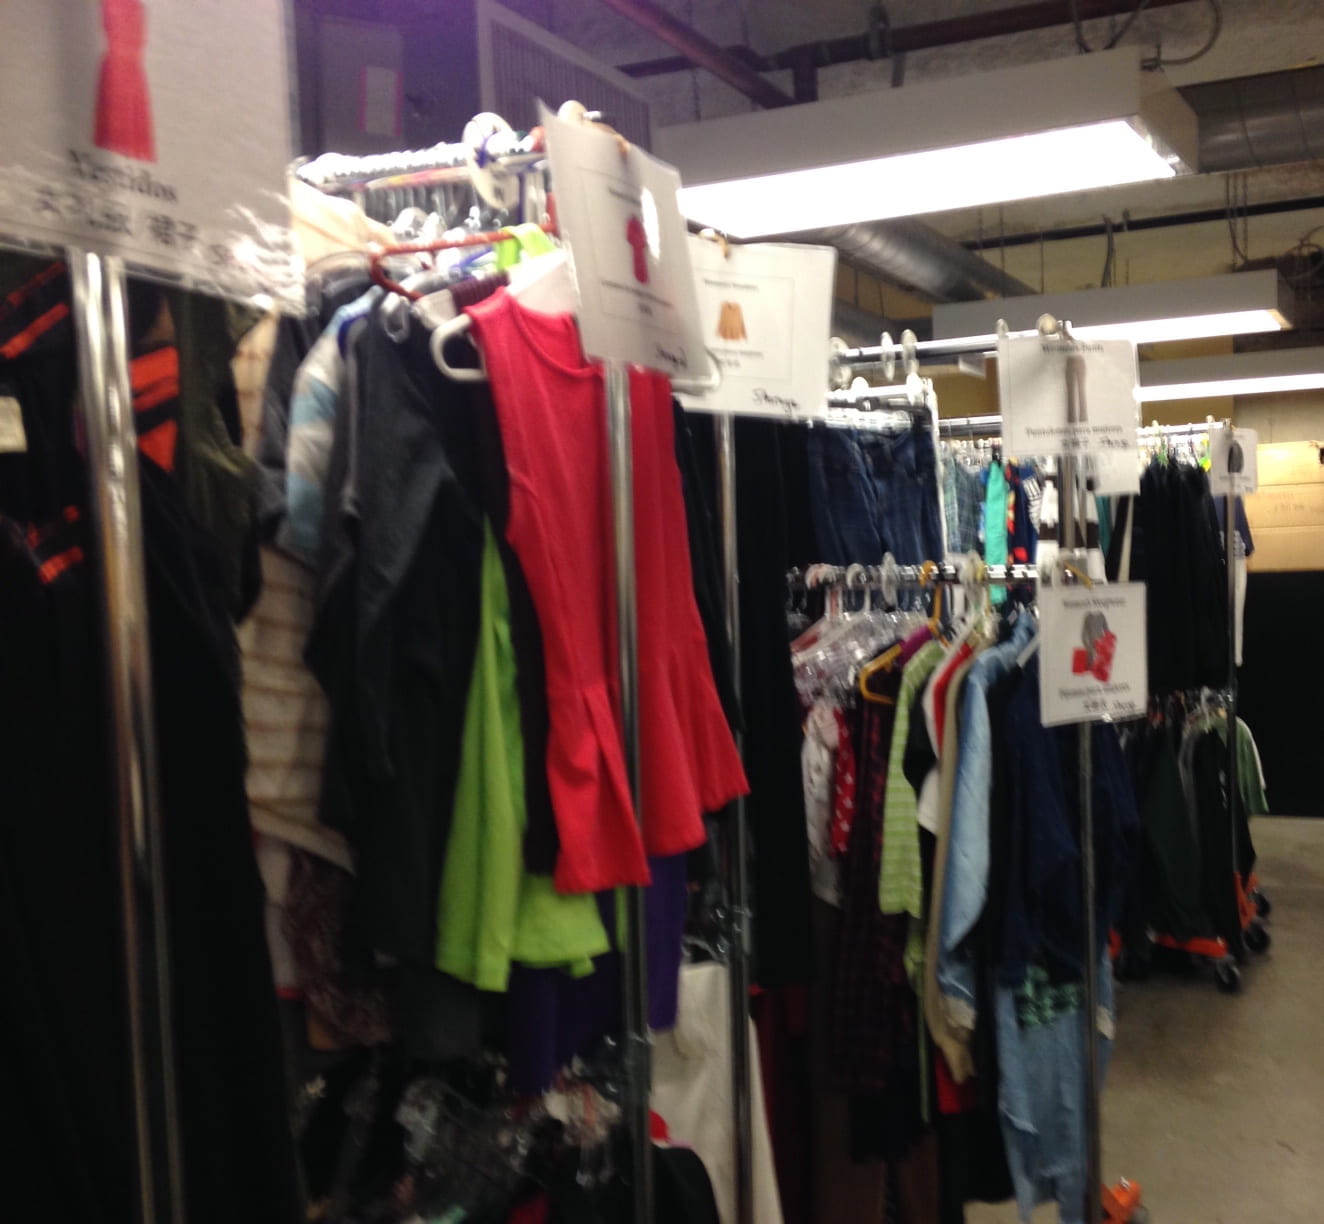 Racks are organized by size and type of clothing, to make it easier for St. Anthony's guests to find clothing in their size and that meets their needs.